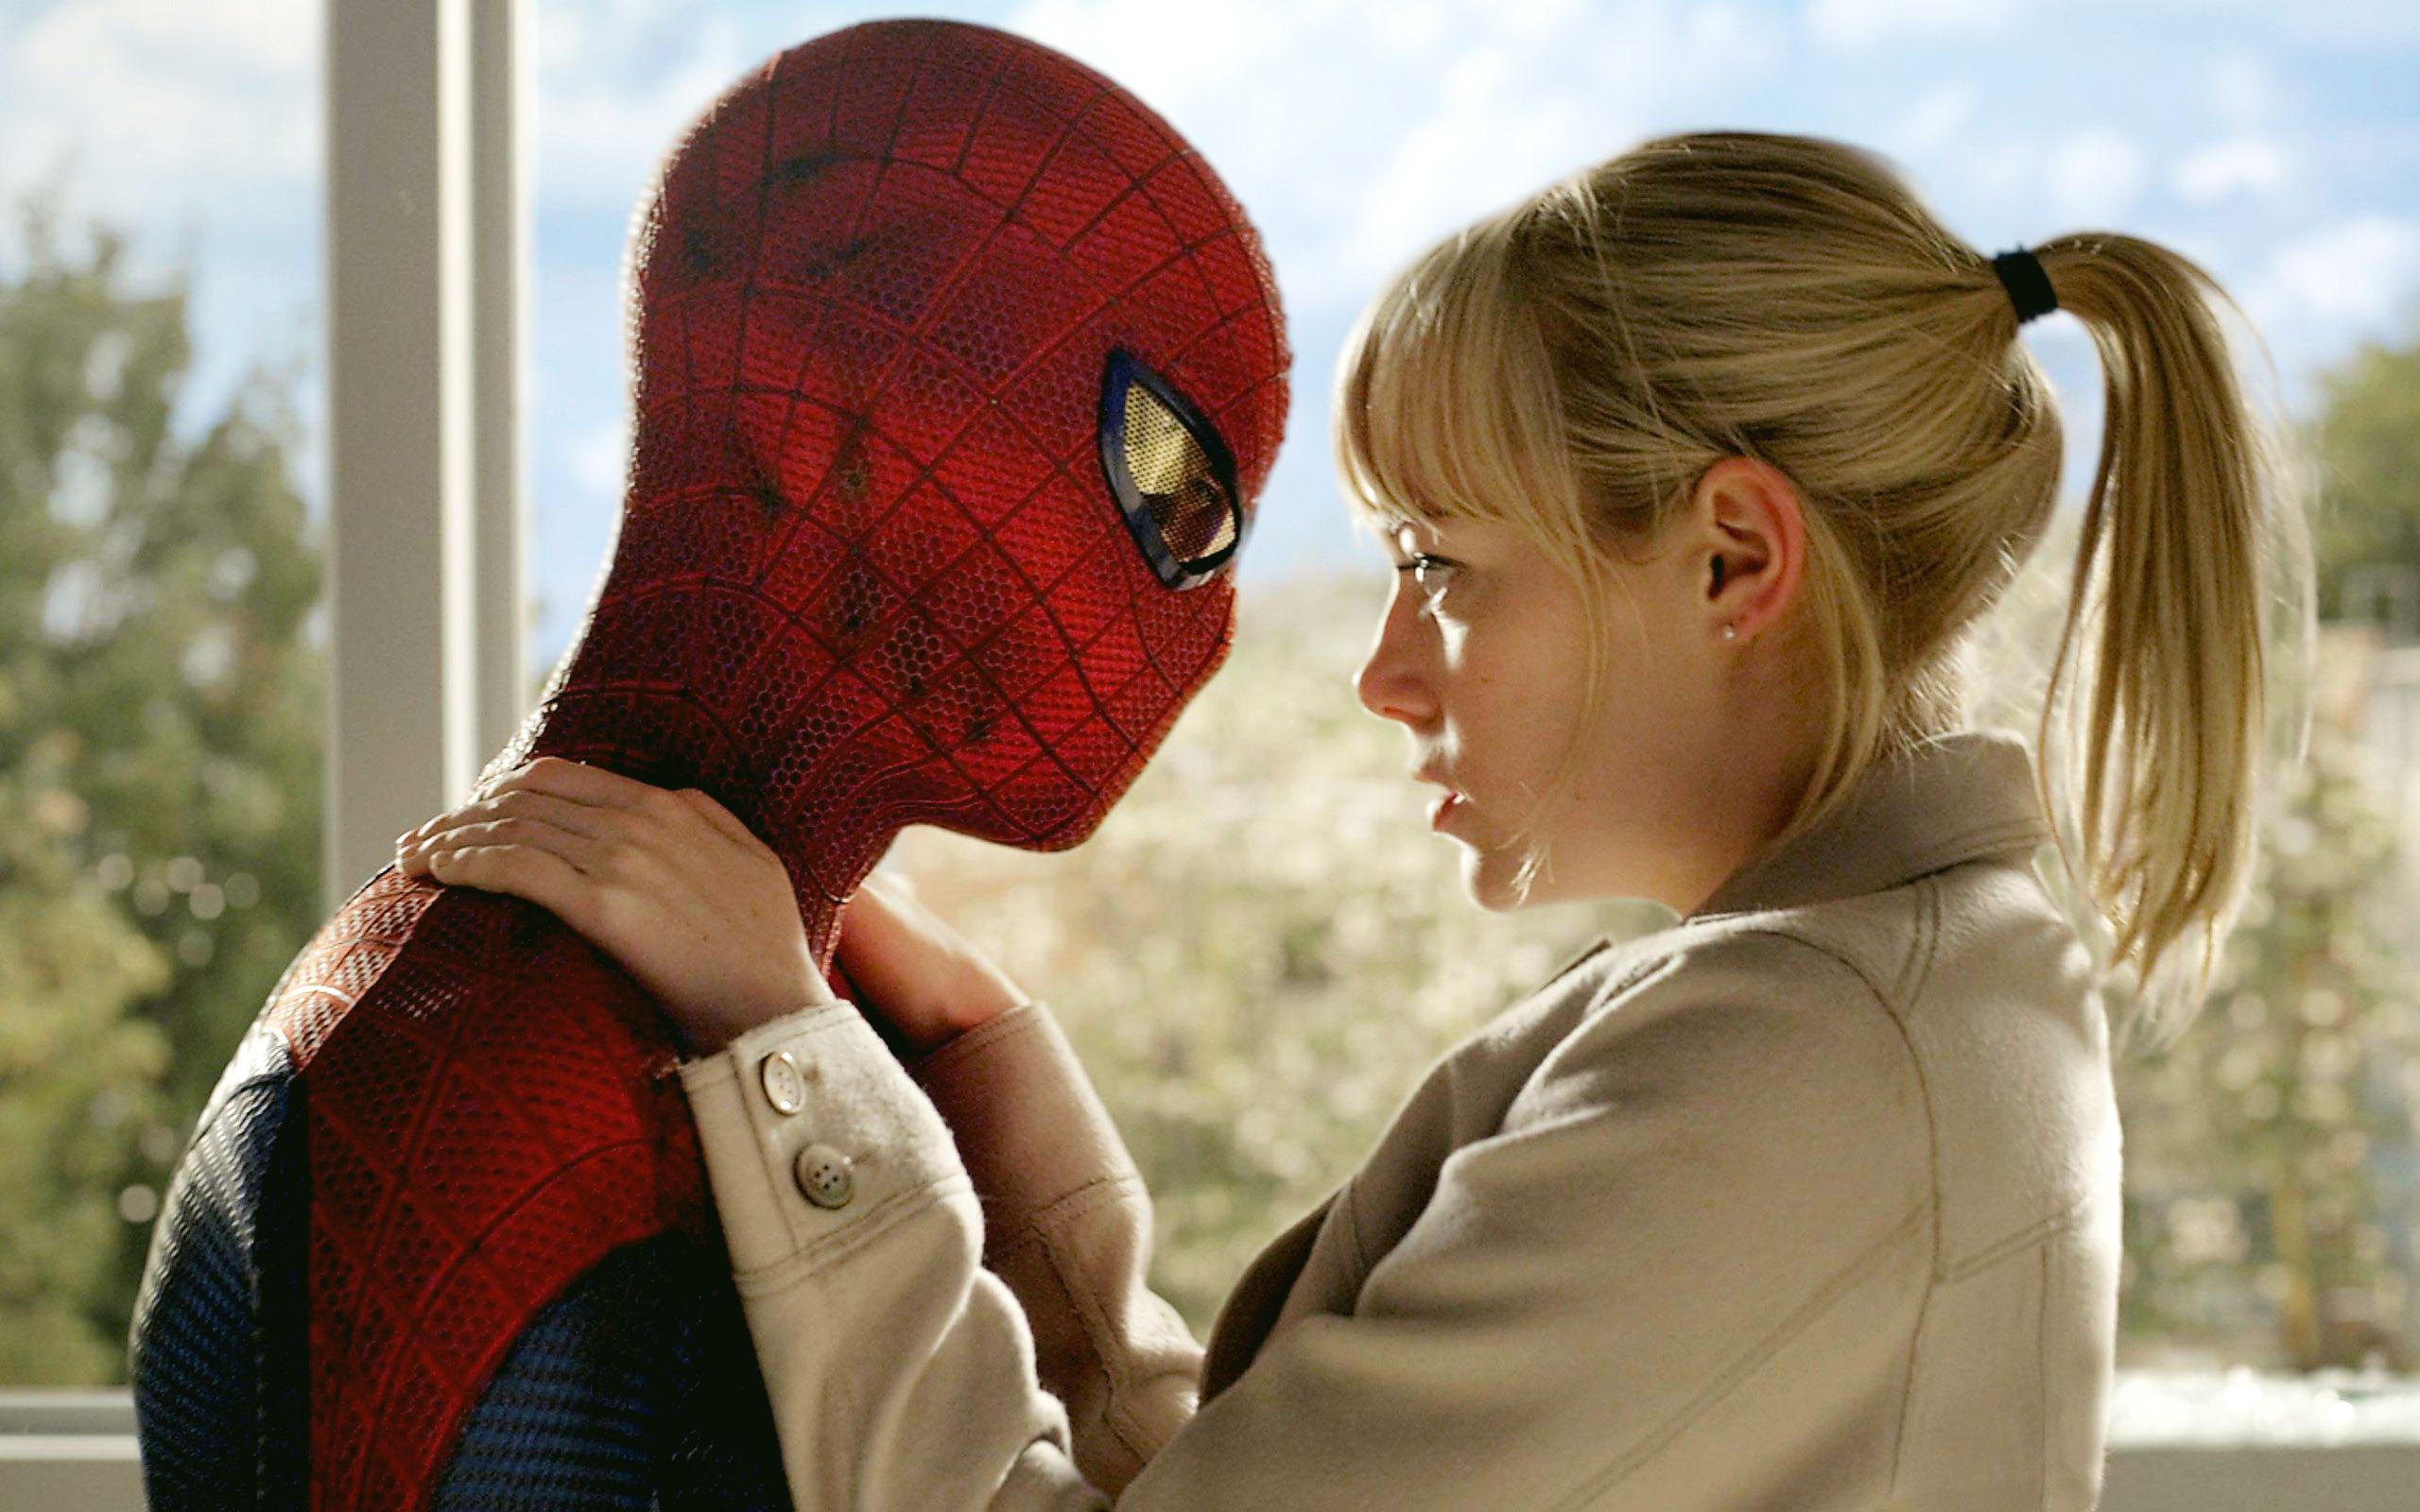 Spider Man and Gwen Stacy Wallpaper